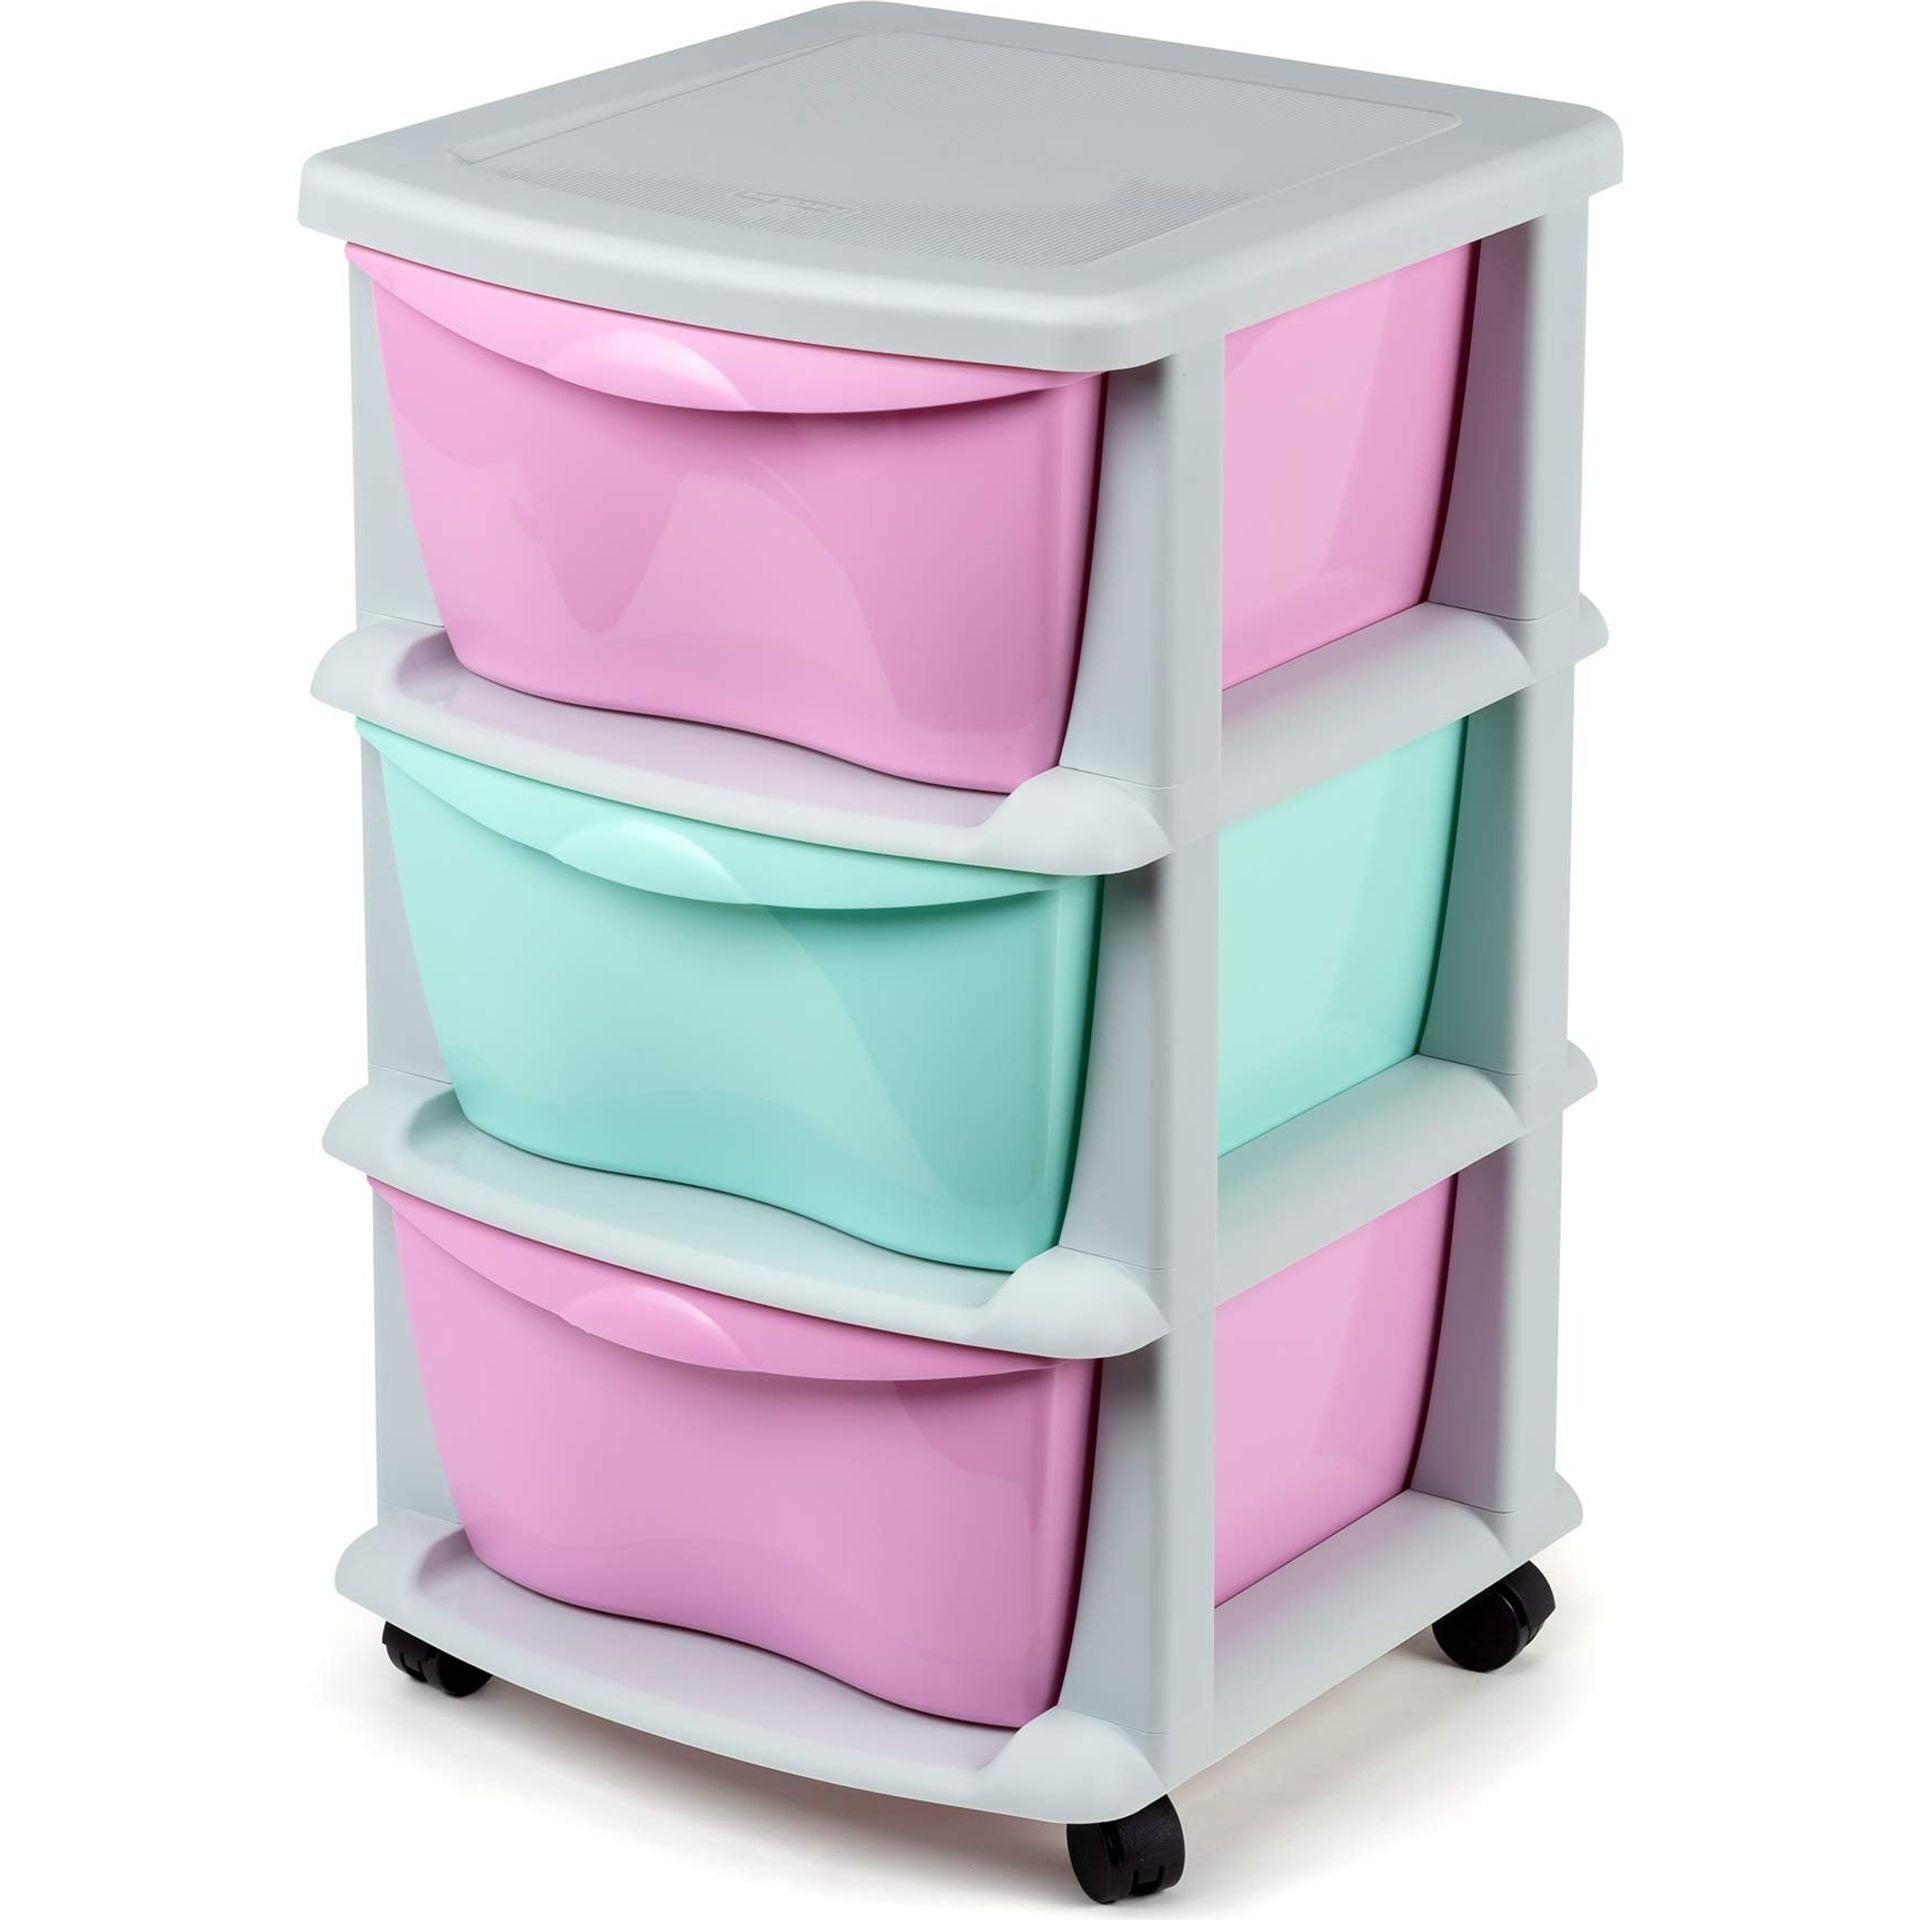 Maxi Nature Plastic Storage Drawers on Wheels - Sturdy Frame, Durable, Heavy Duty Organiser - 3 Tier Large Storage Unit for Kids Bedroom, Bathroom, Office - Made in Europe - Pink/Blue 0